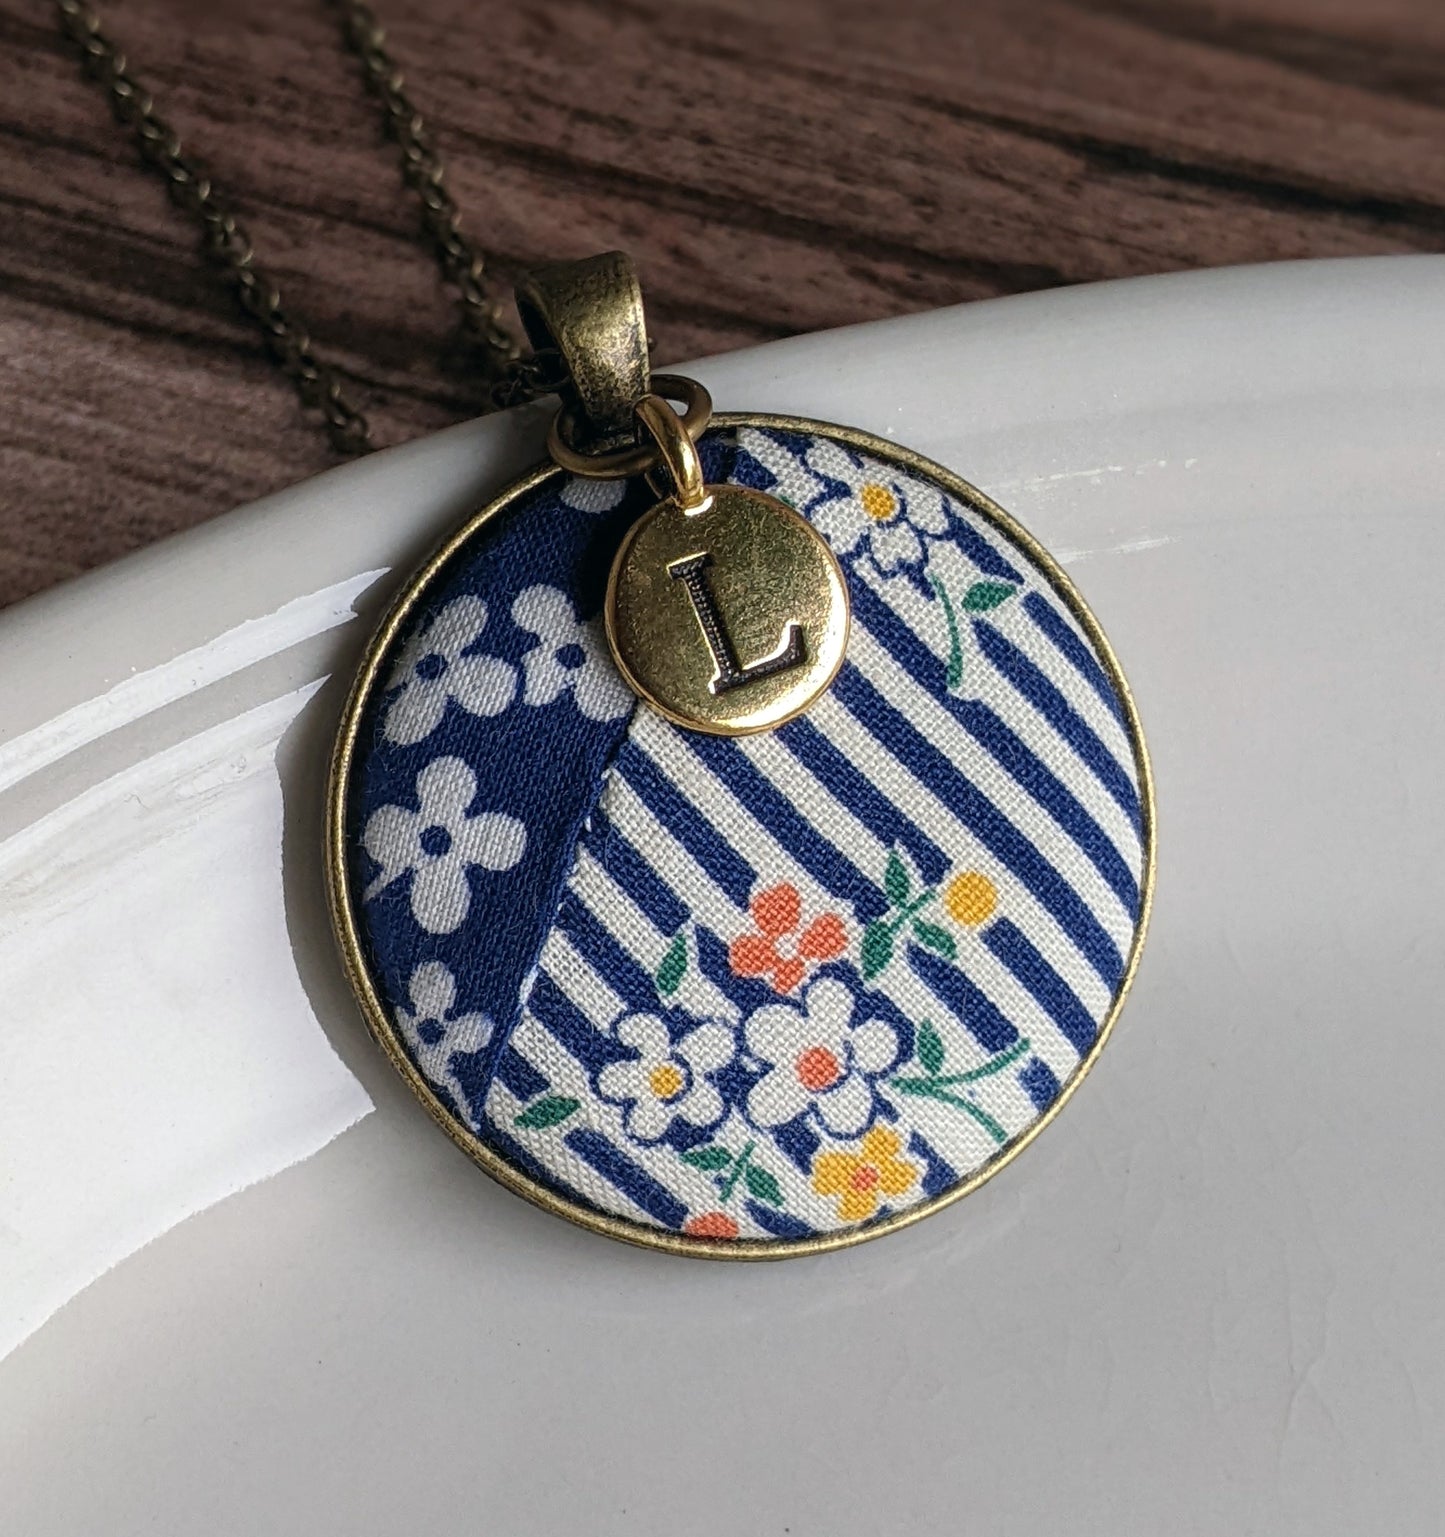 Vintage Quilt Necklace With Letter Charm - Navy Blue Floral And White Stripes